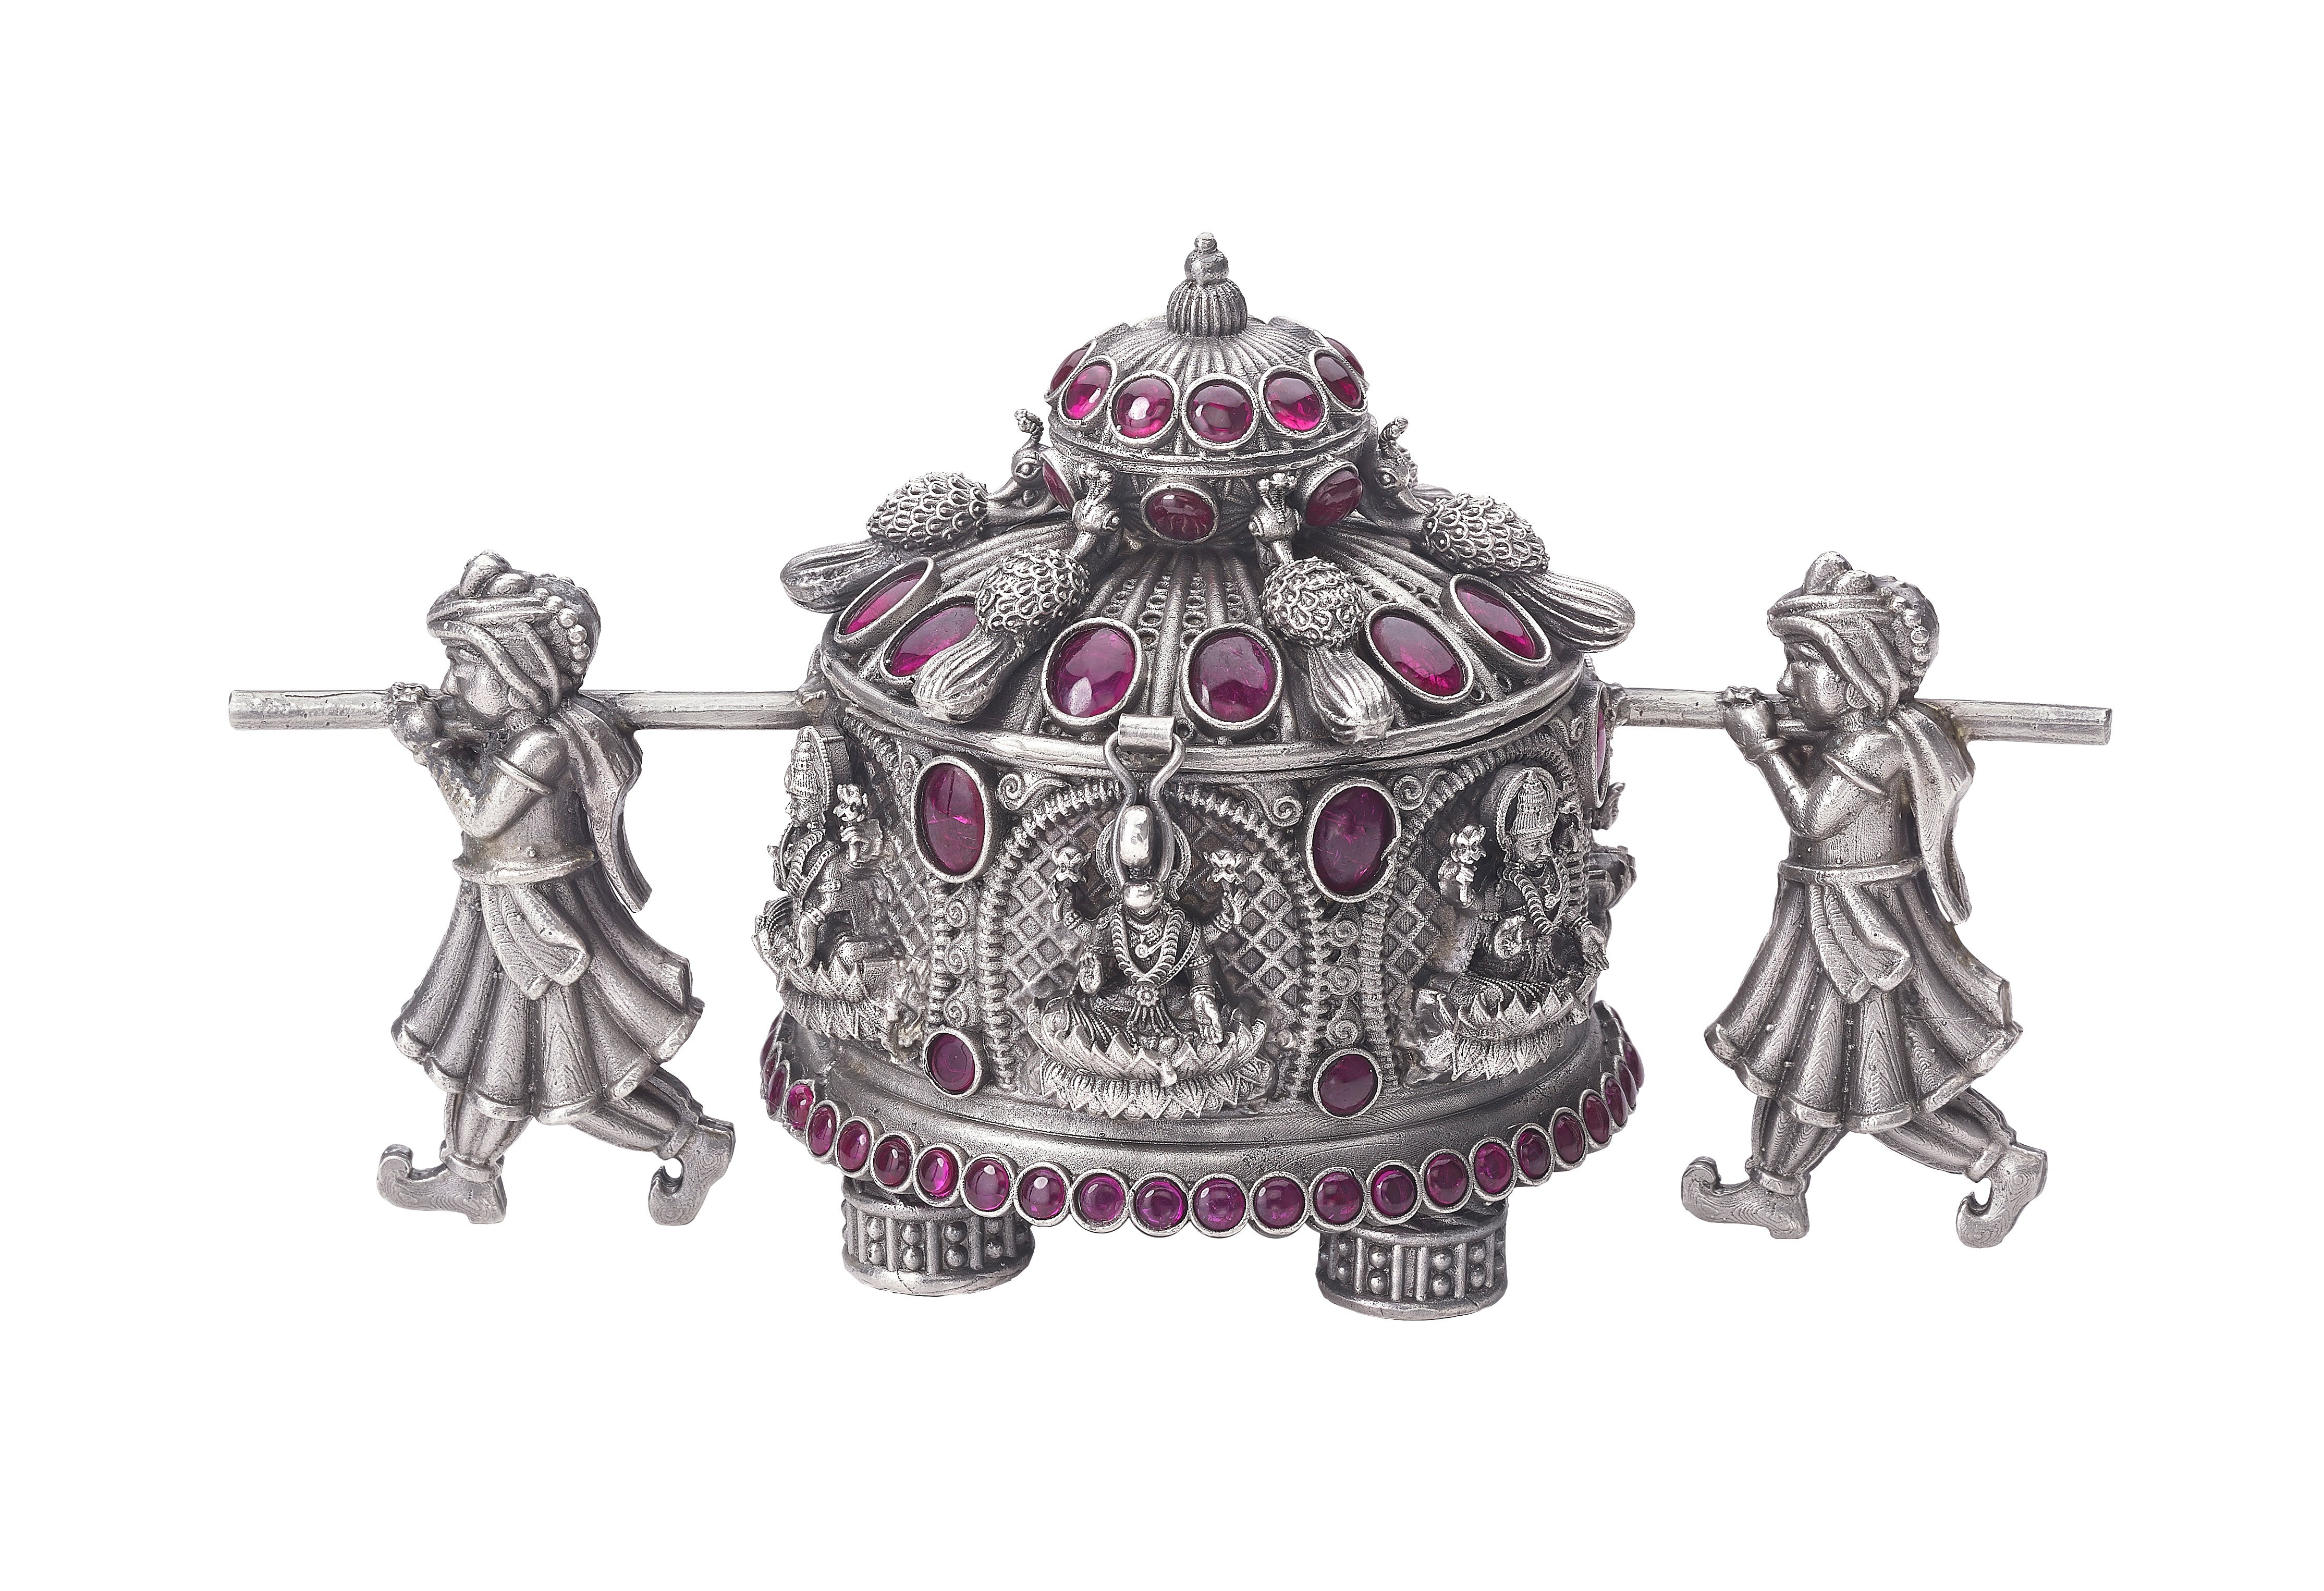 The Royal Palkhi Sterling Silver Statue